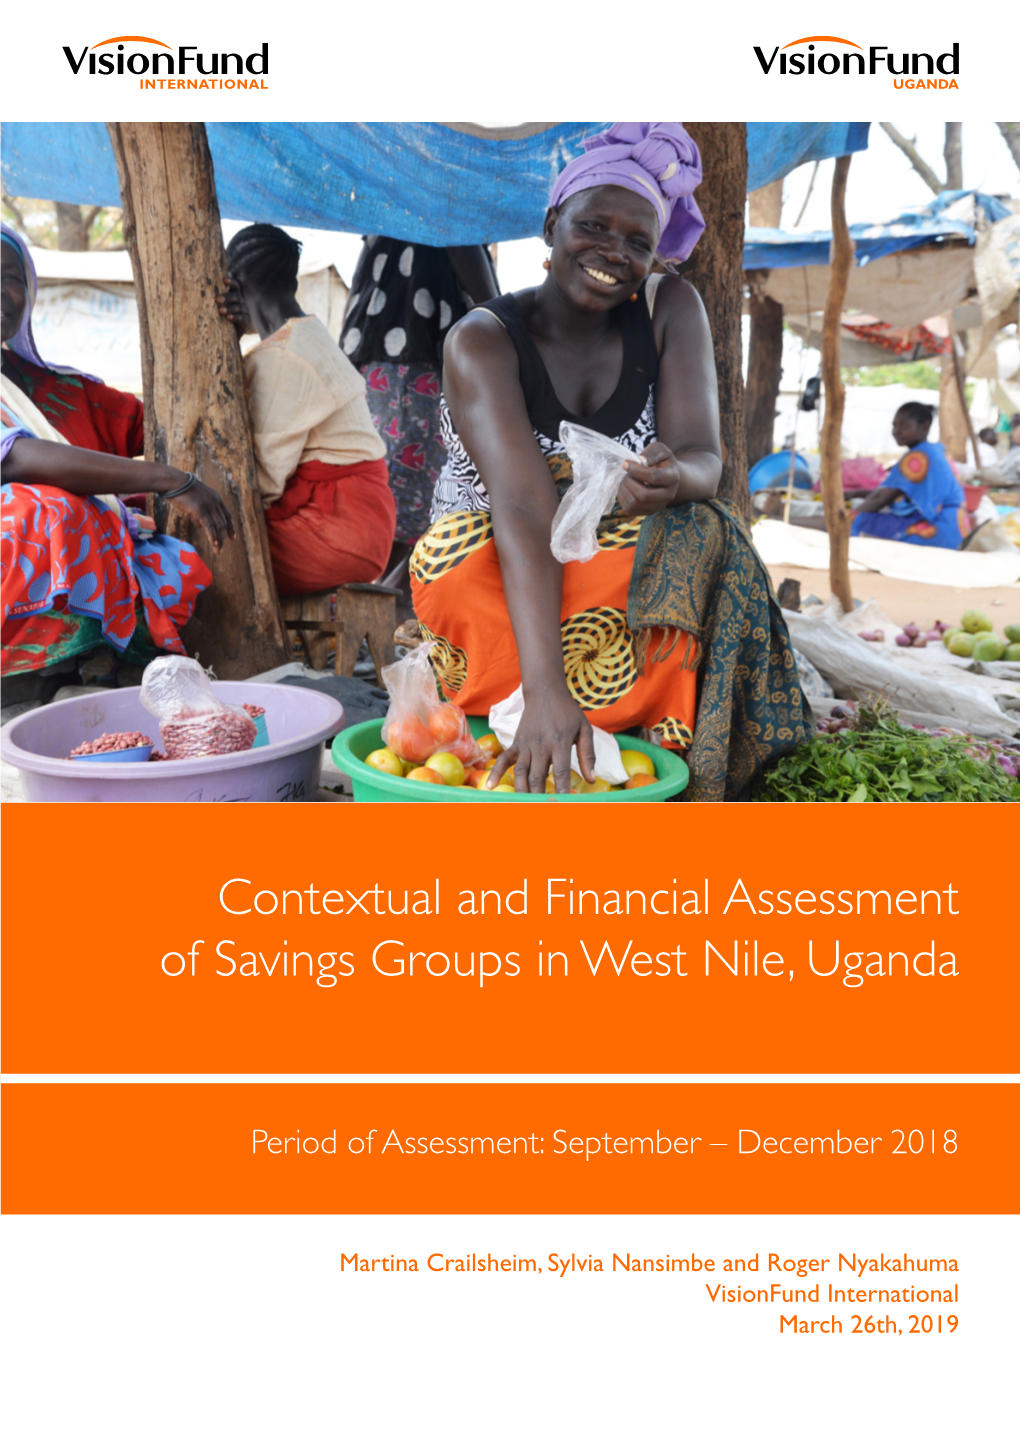 Contextual and Financial Assessment of Savings Groups in West Nile, Uganda